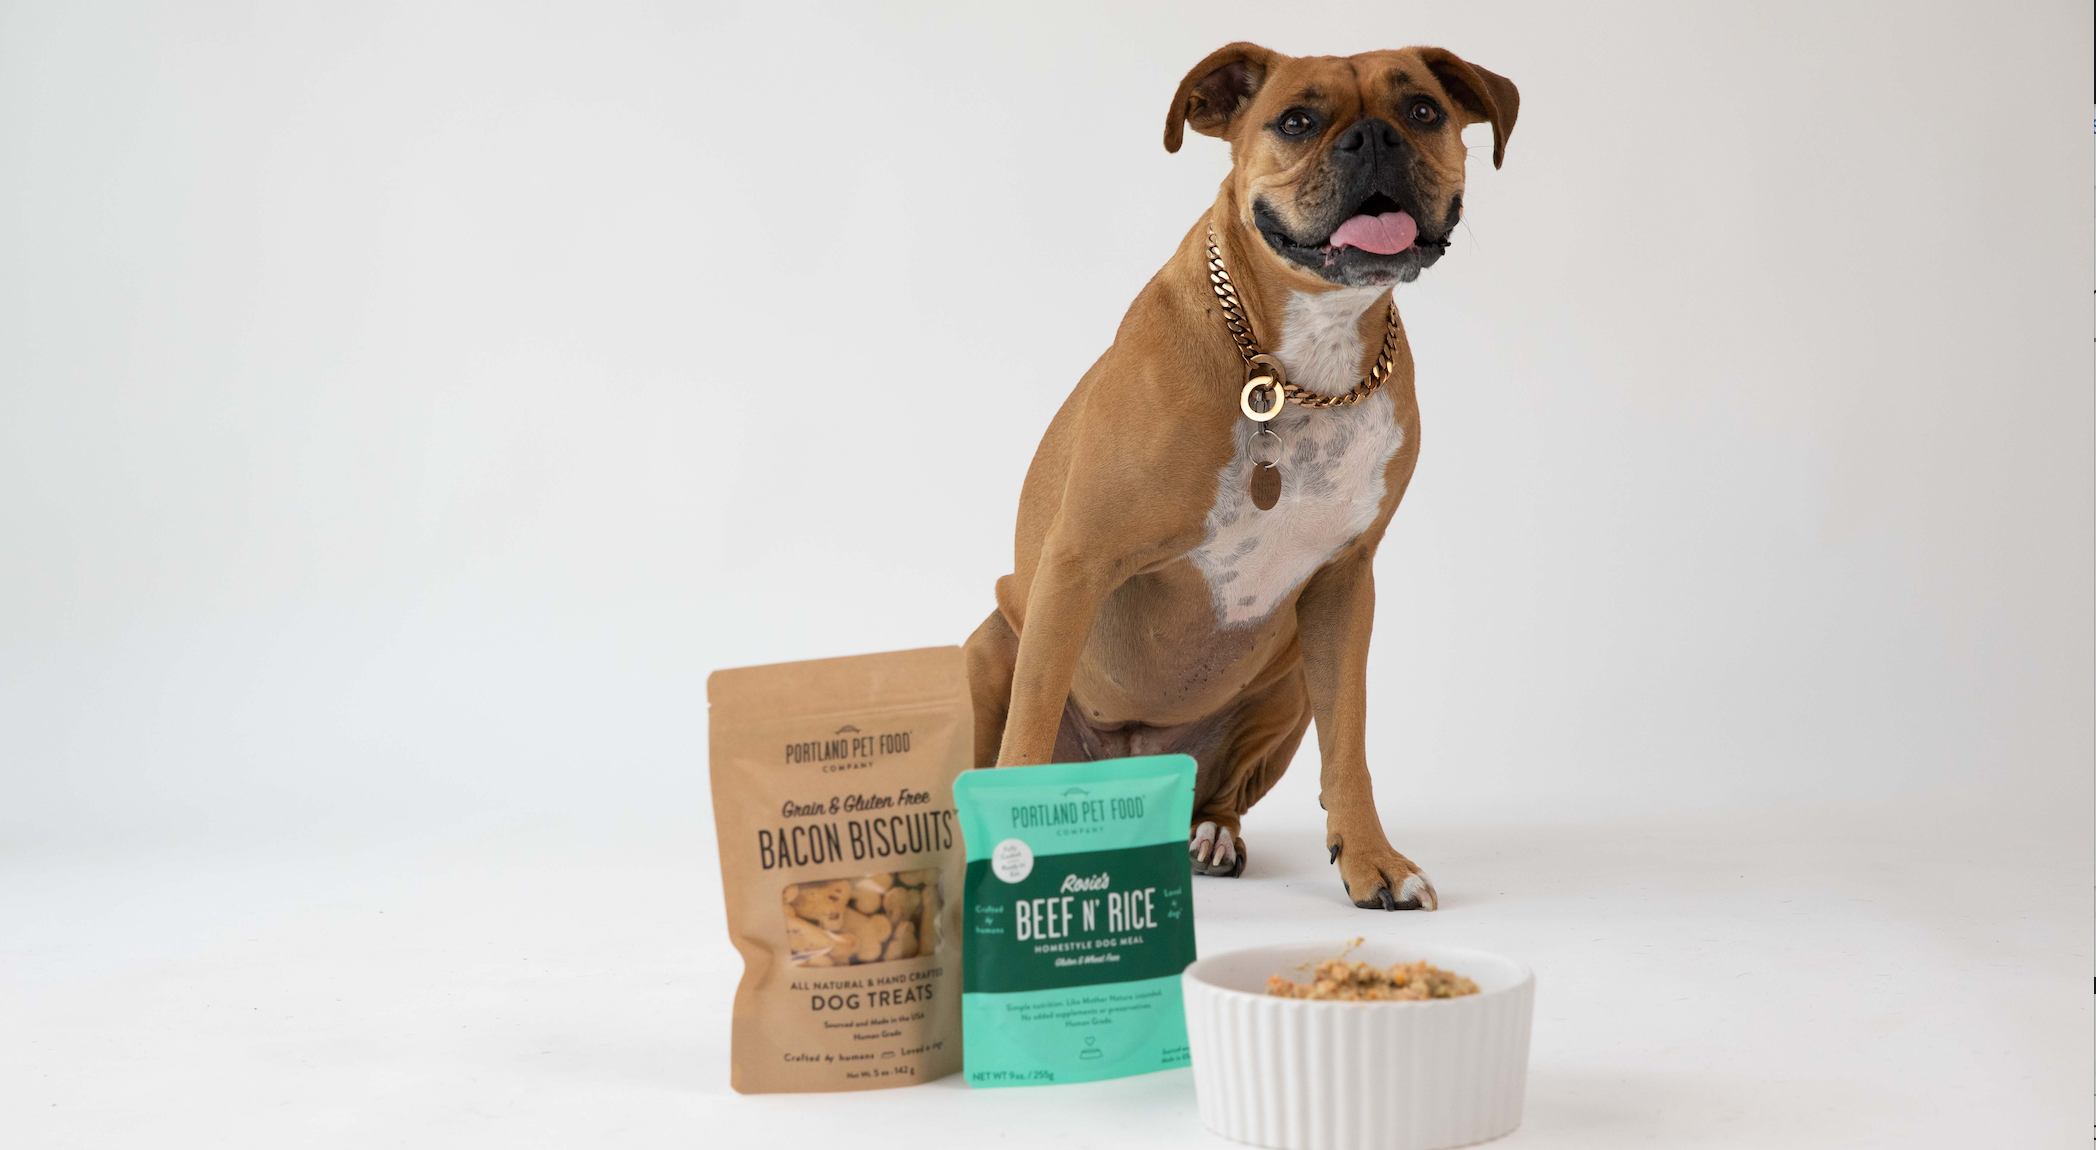 Portland Pet Food Company Now Available At The Vitamin Shoppe®